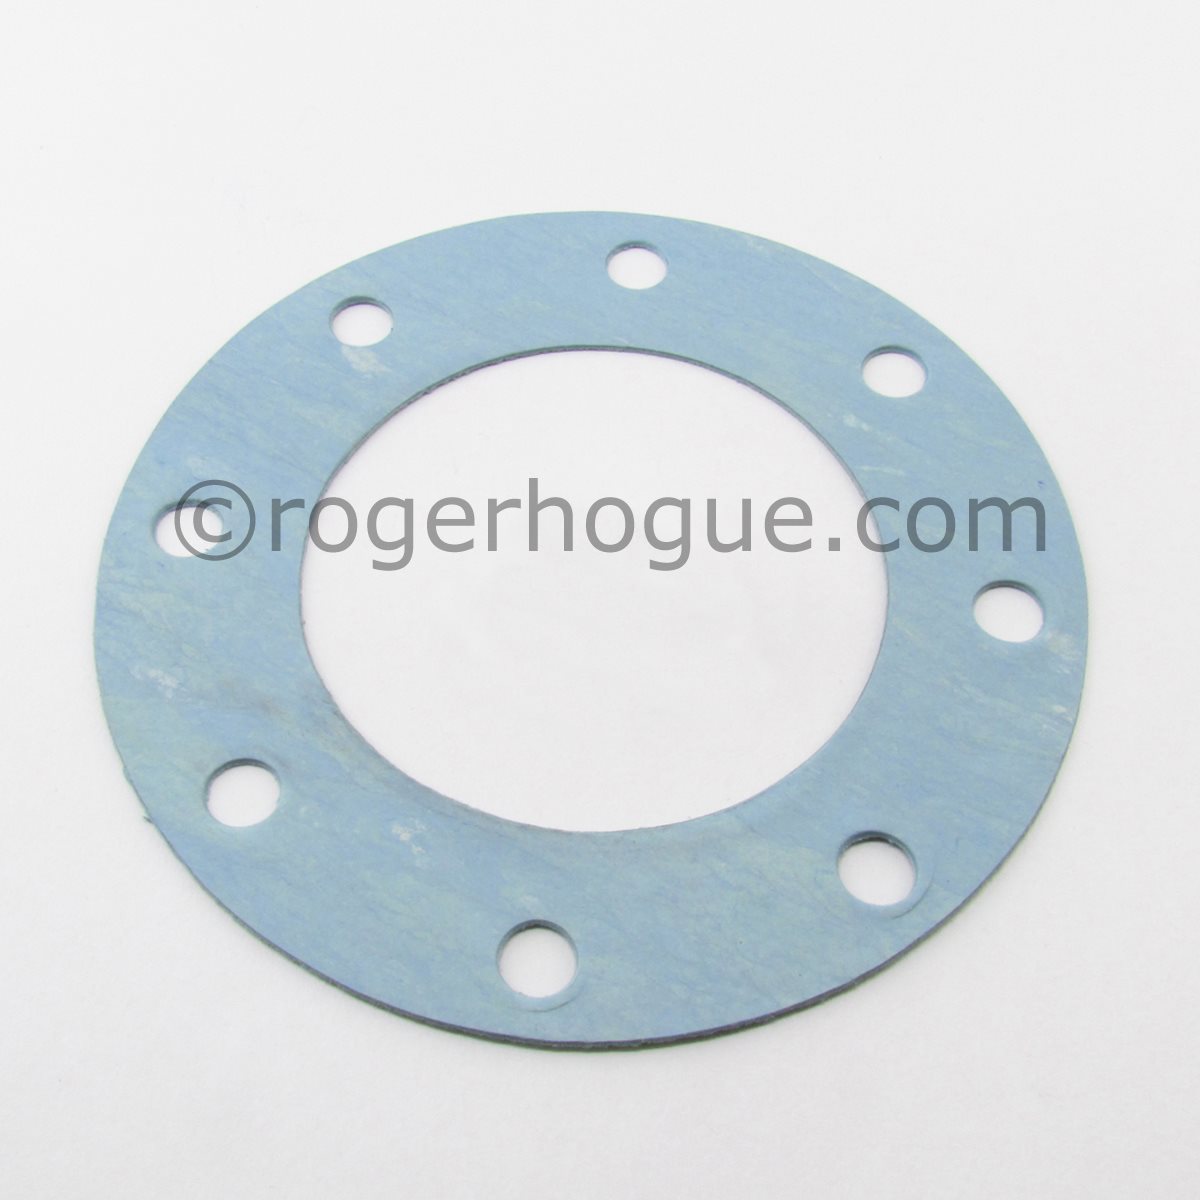 8 HOLE GASKET FOR 150 SERIES (325400)